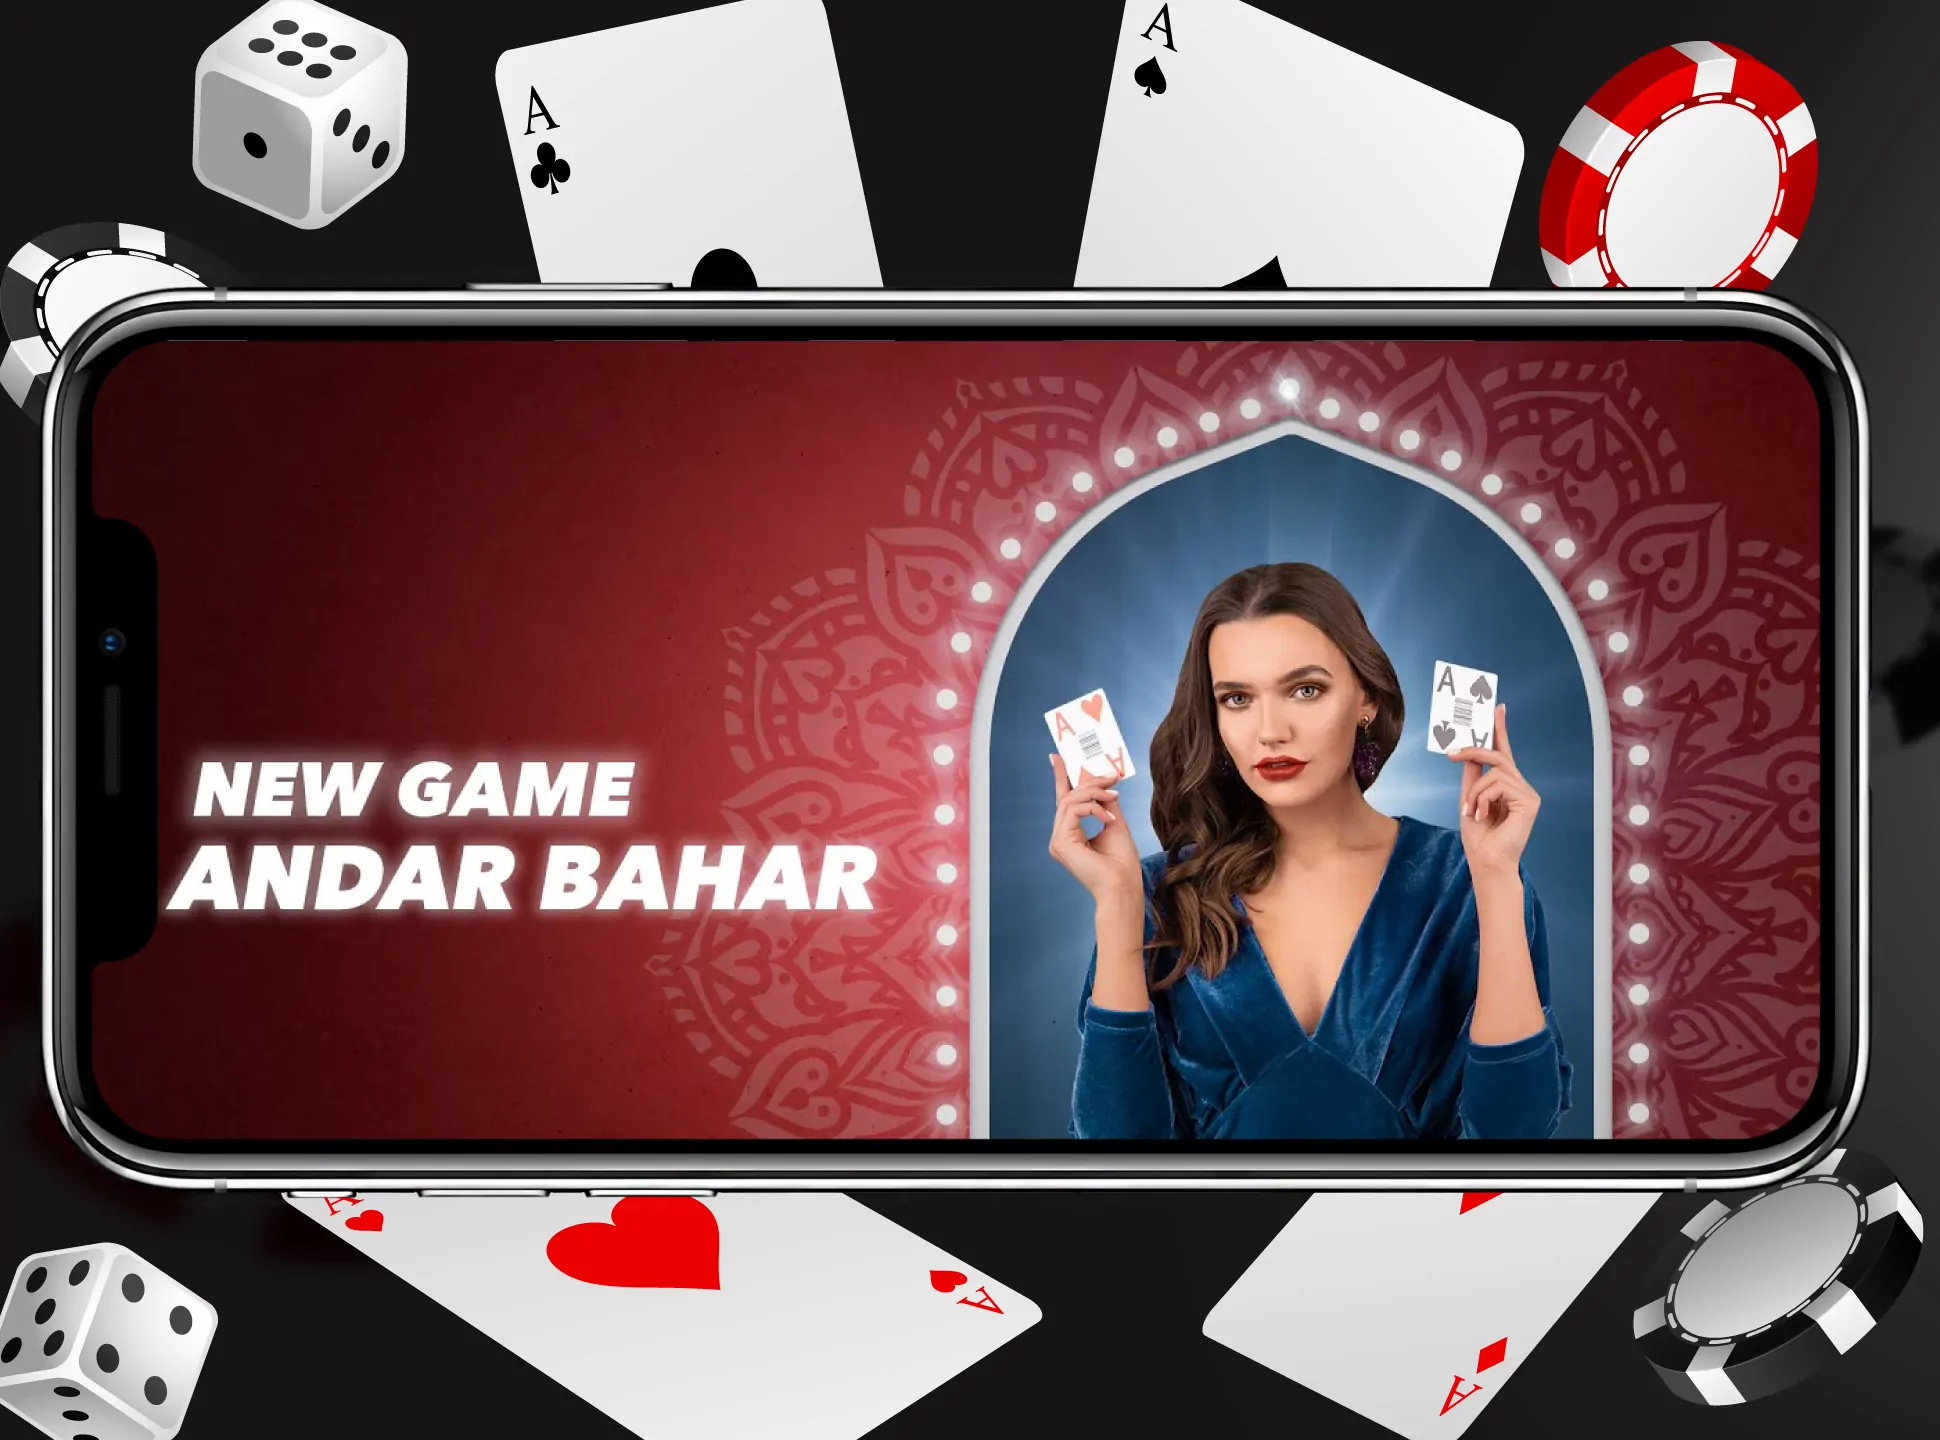 There are also Andar Bahar games in the Parimatch mobile casino.